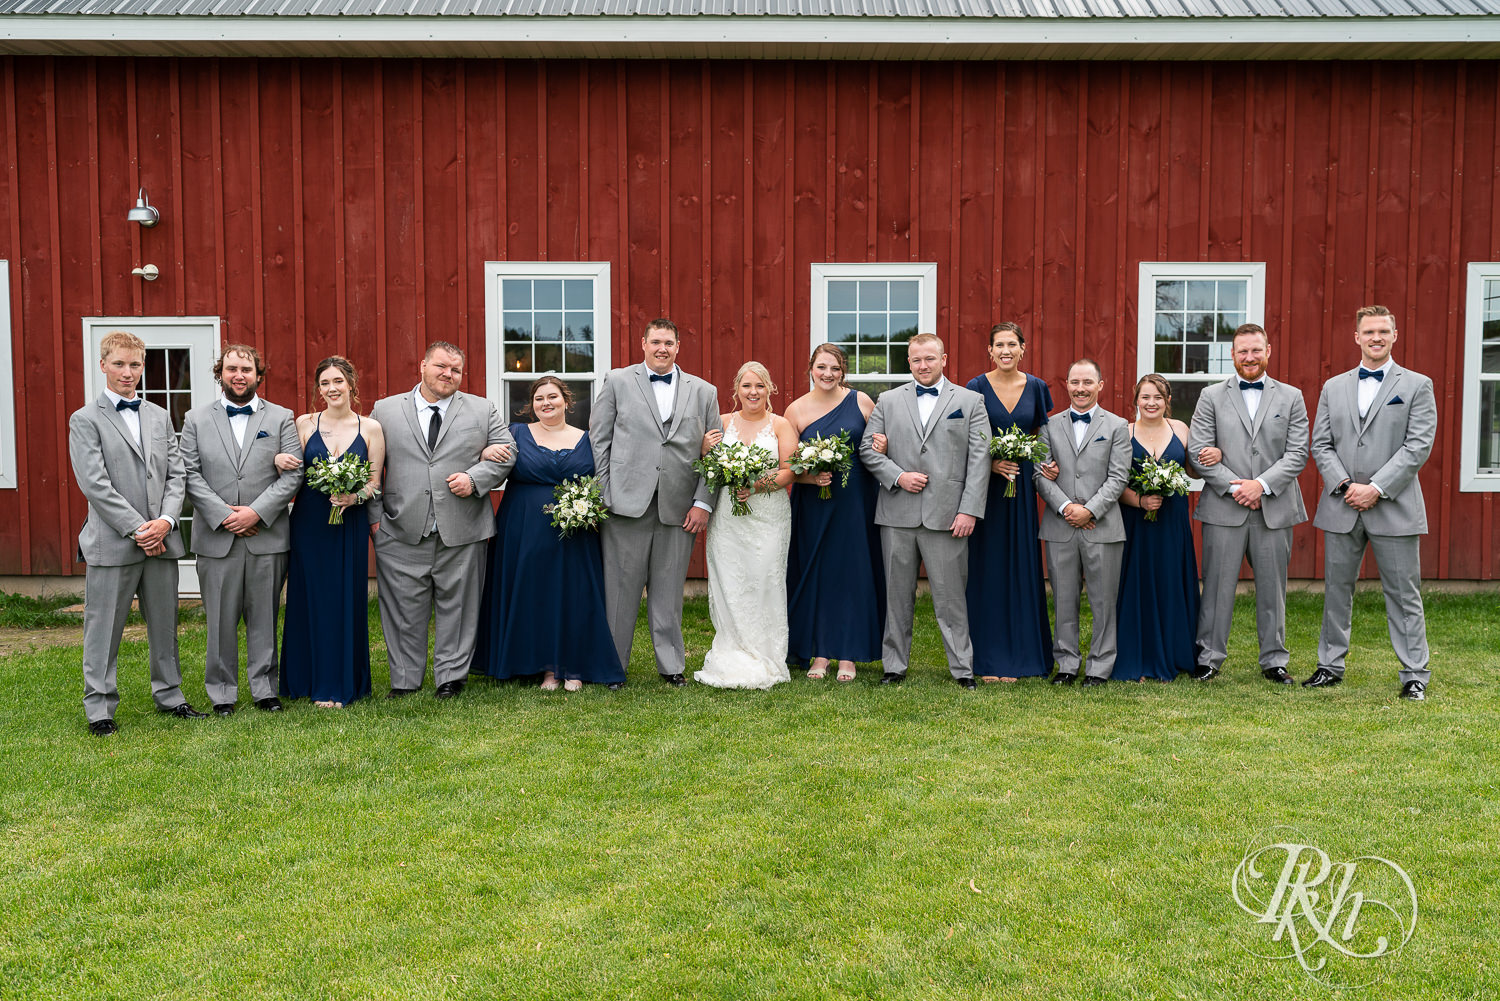 Wedding party in front of barn at Barn at Mirror Lake in Mondovi, Wisconsin.